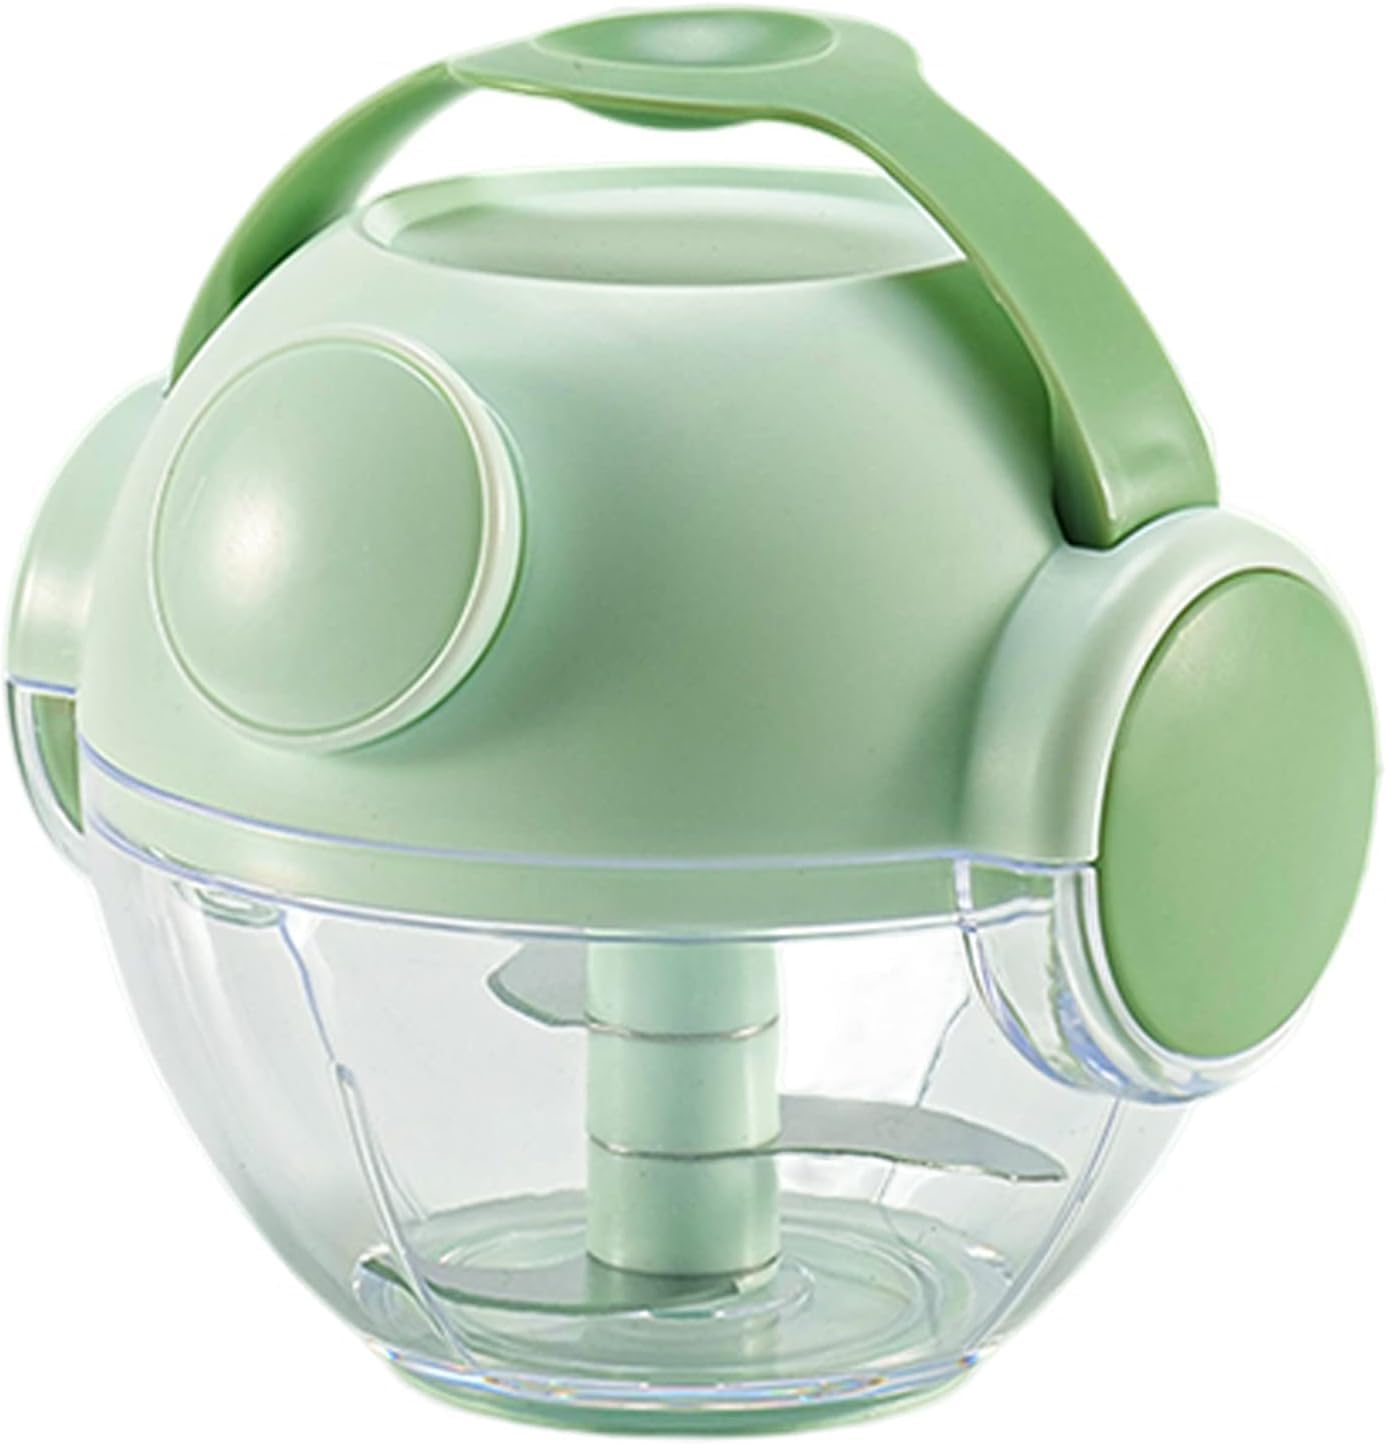 25 X MULTI-FUNCTION MINI GARLIC CRUSHER - QUICK AND EASY TO CLEAN - PERFECT FOR CHOPPER VEGETABLES, GARLIC, ONION, AND MORE - CUTE MANUAL CHOPPER (MUSIC BOX SHAPE) - TOTAL RRP £275: LOCATION - B RACK